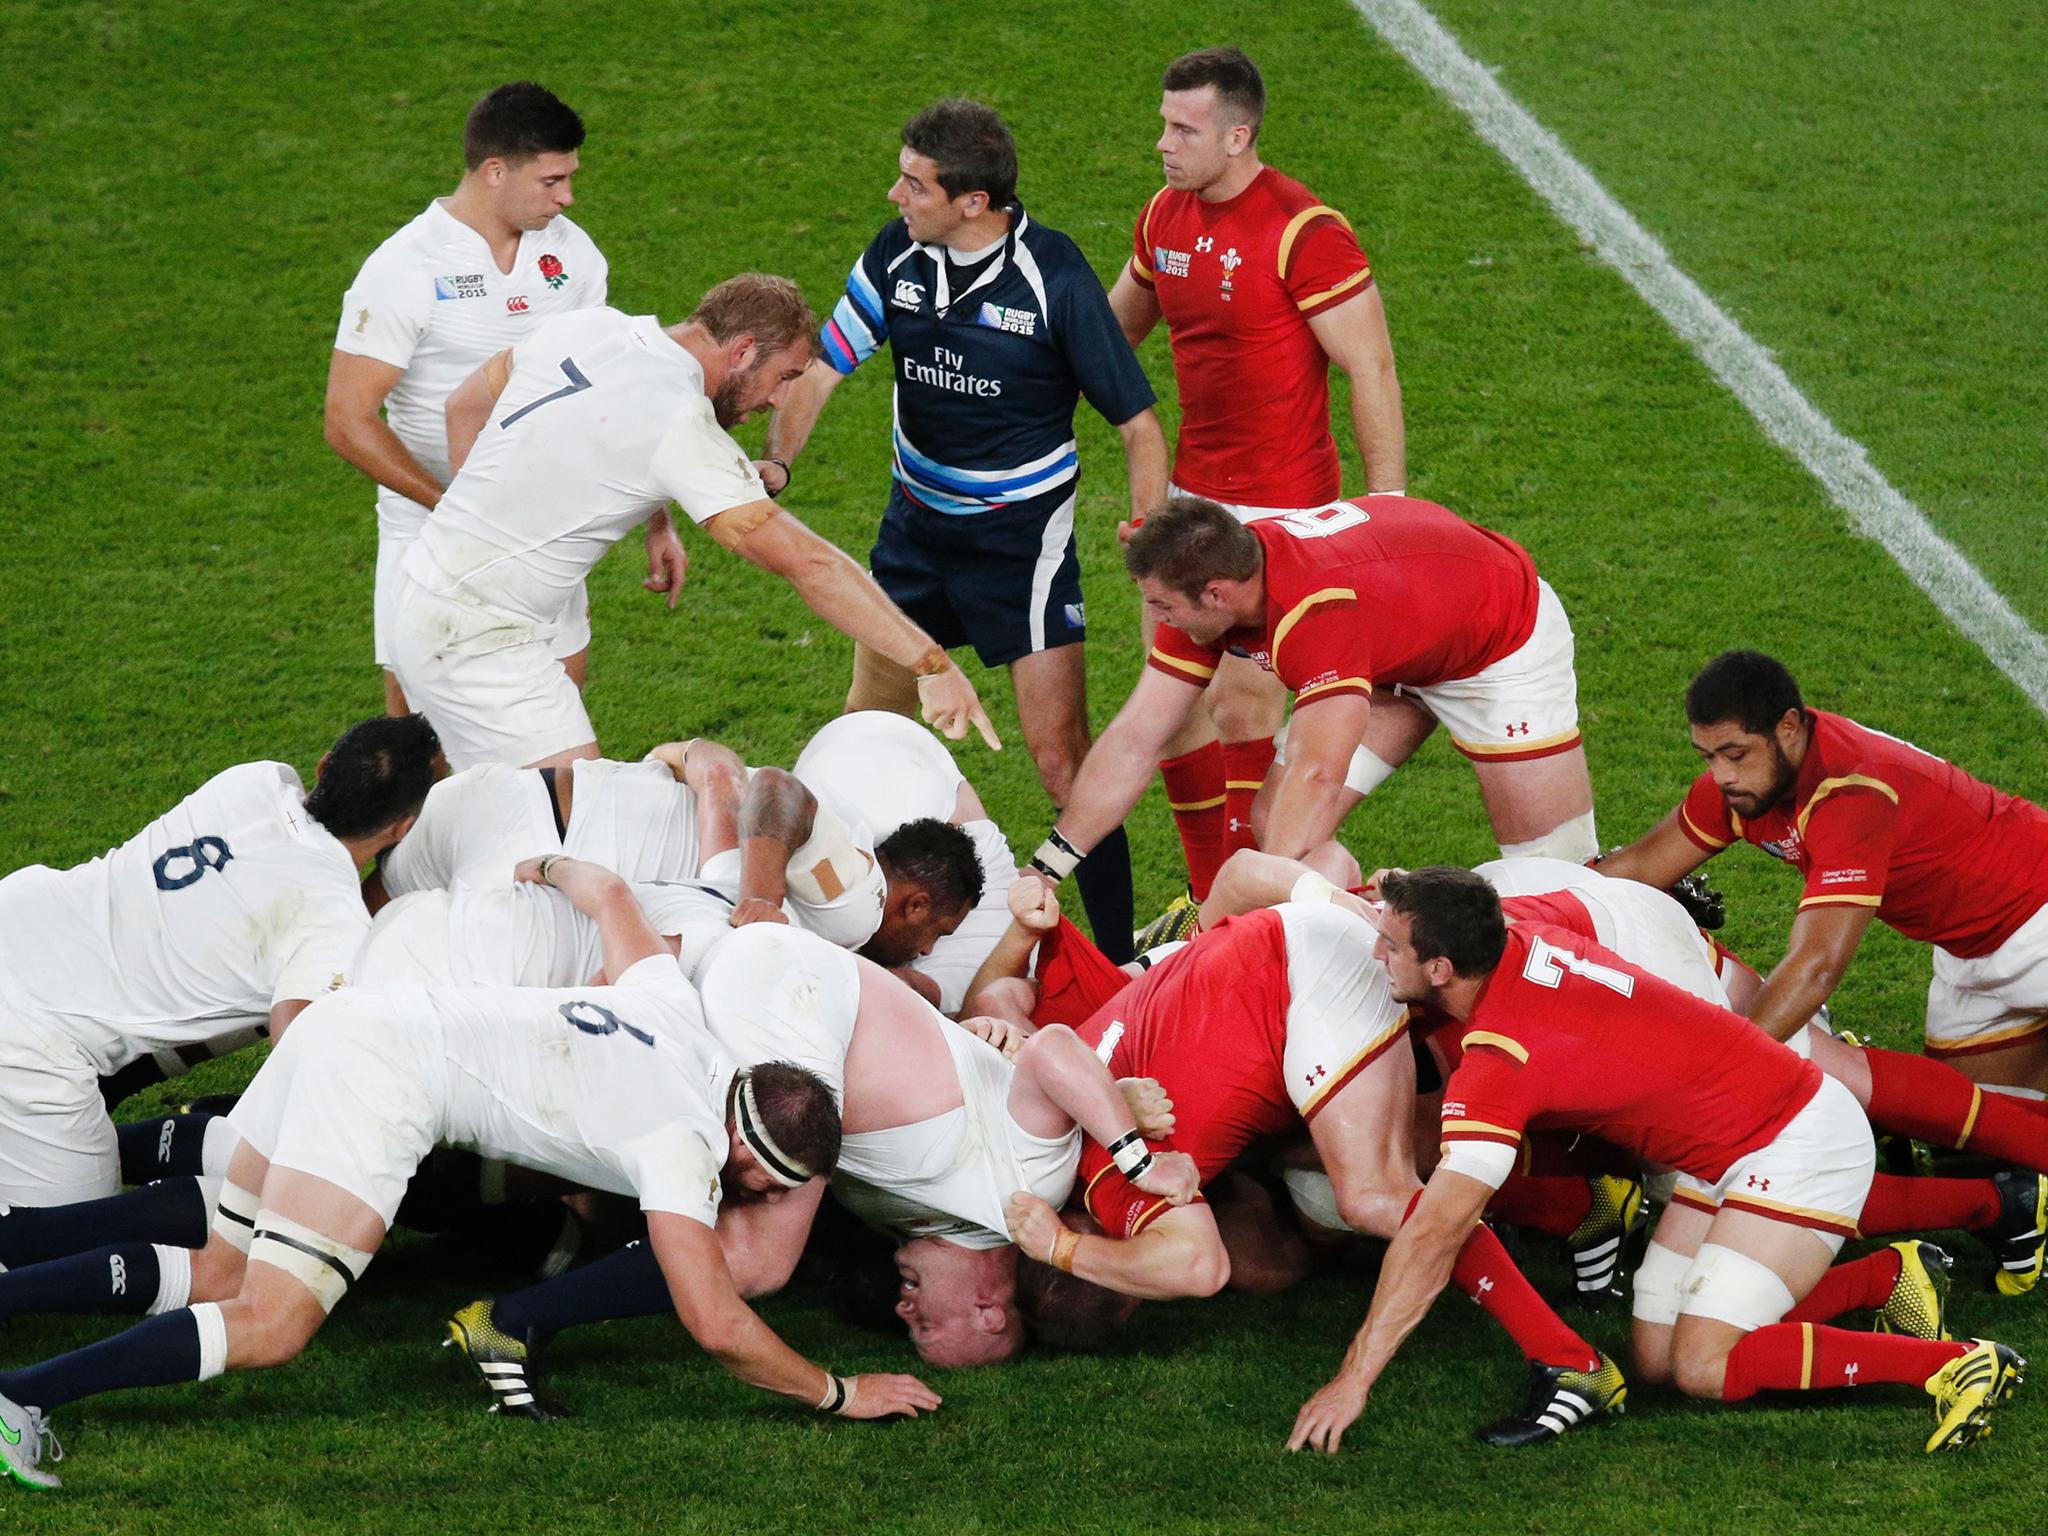 England and Wales will train against each other to practice scrums and lineouts